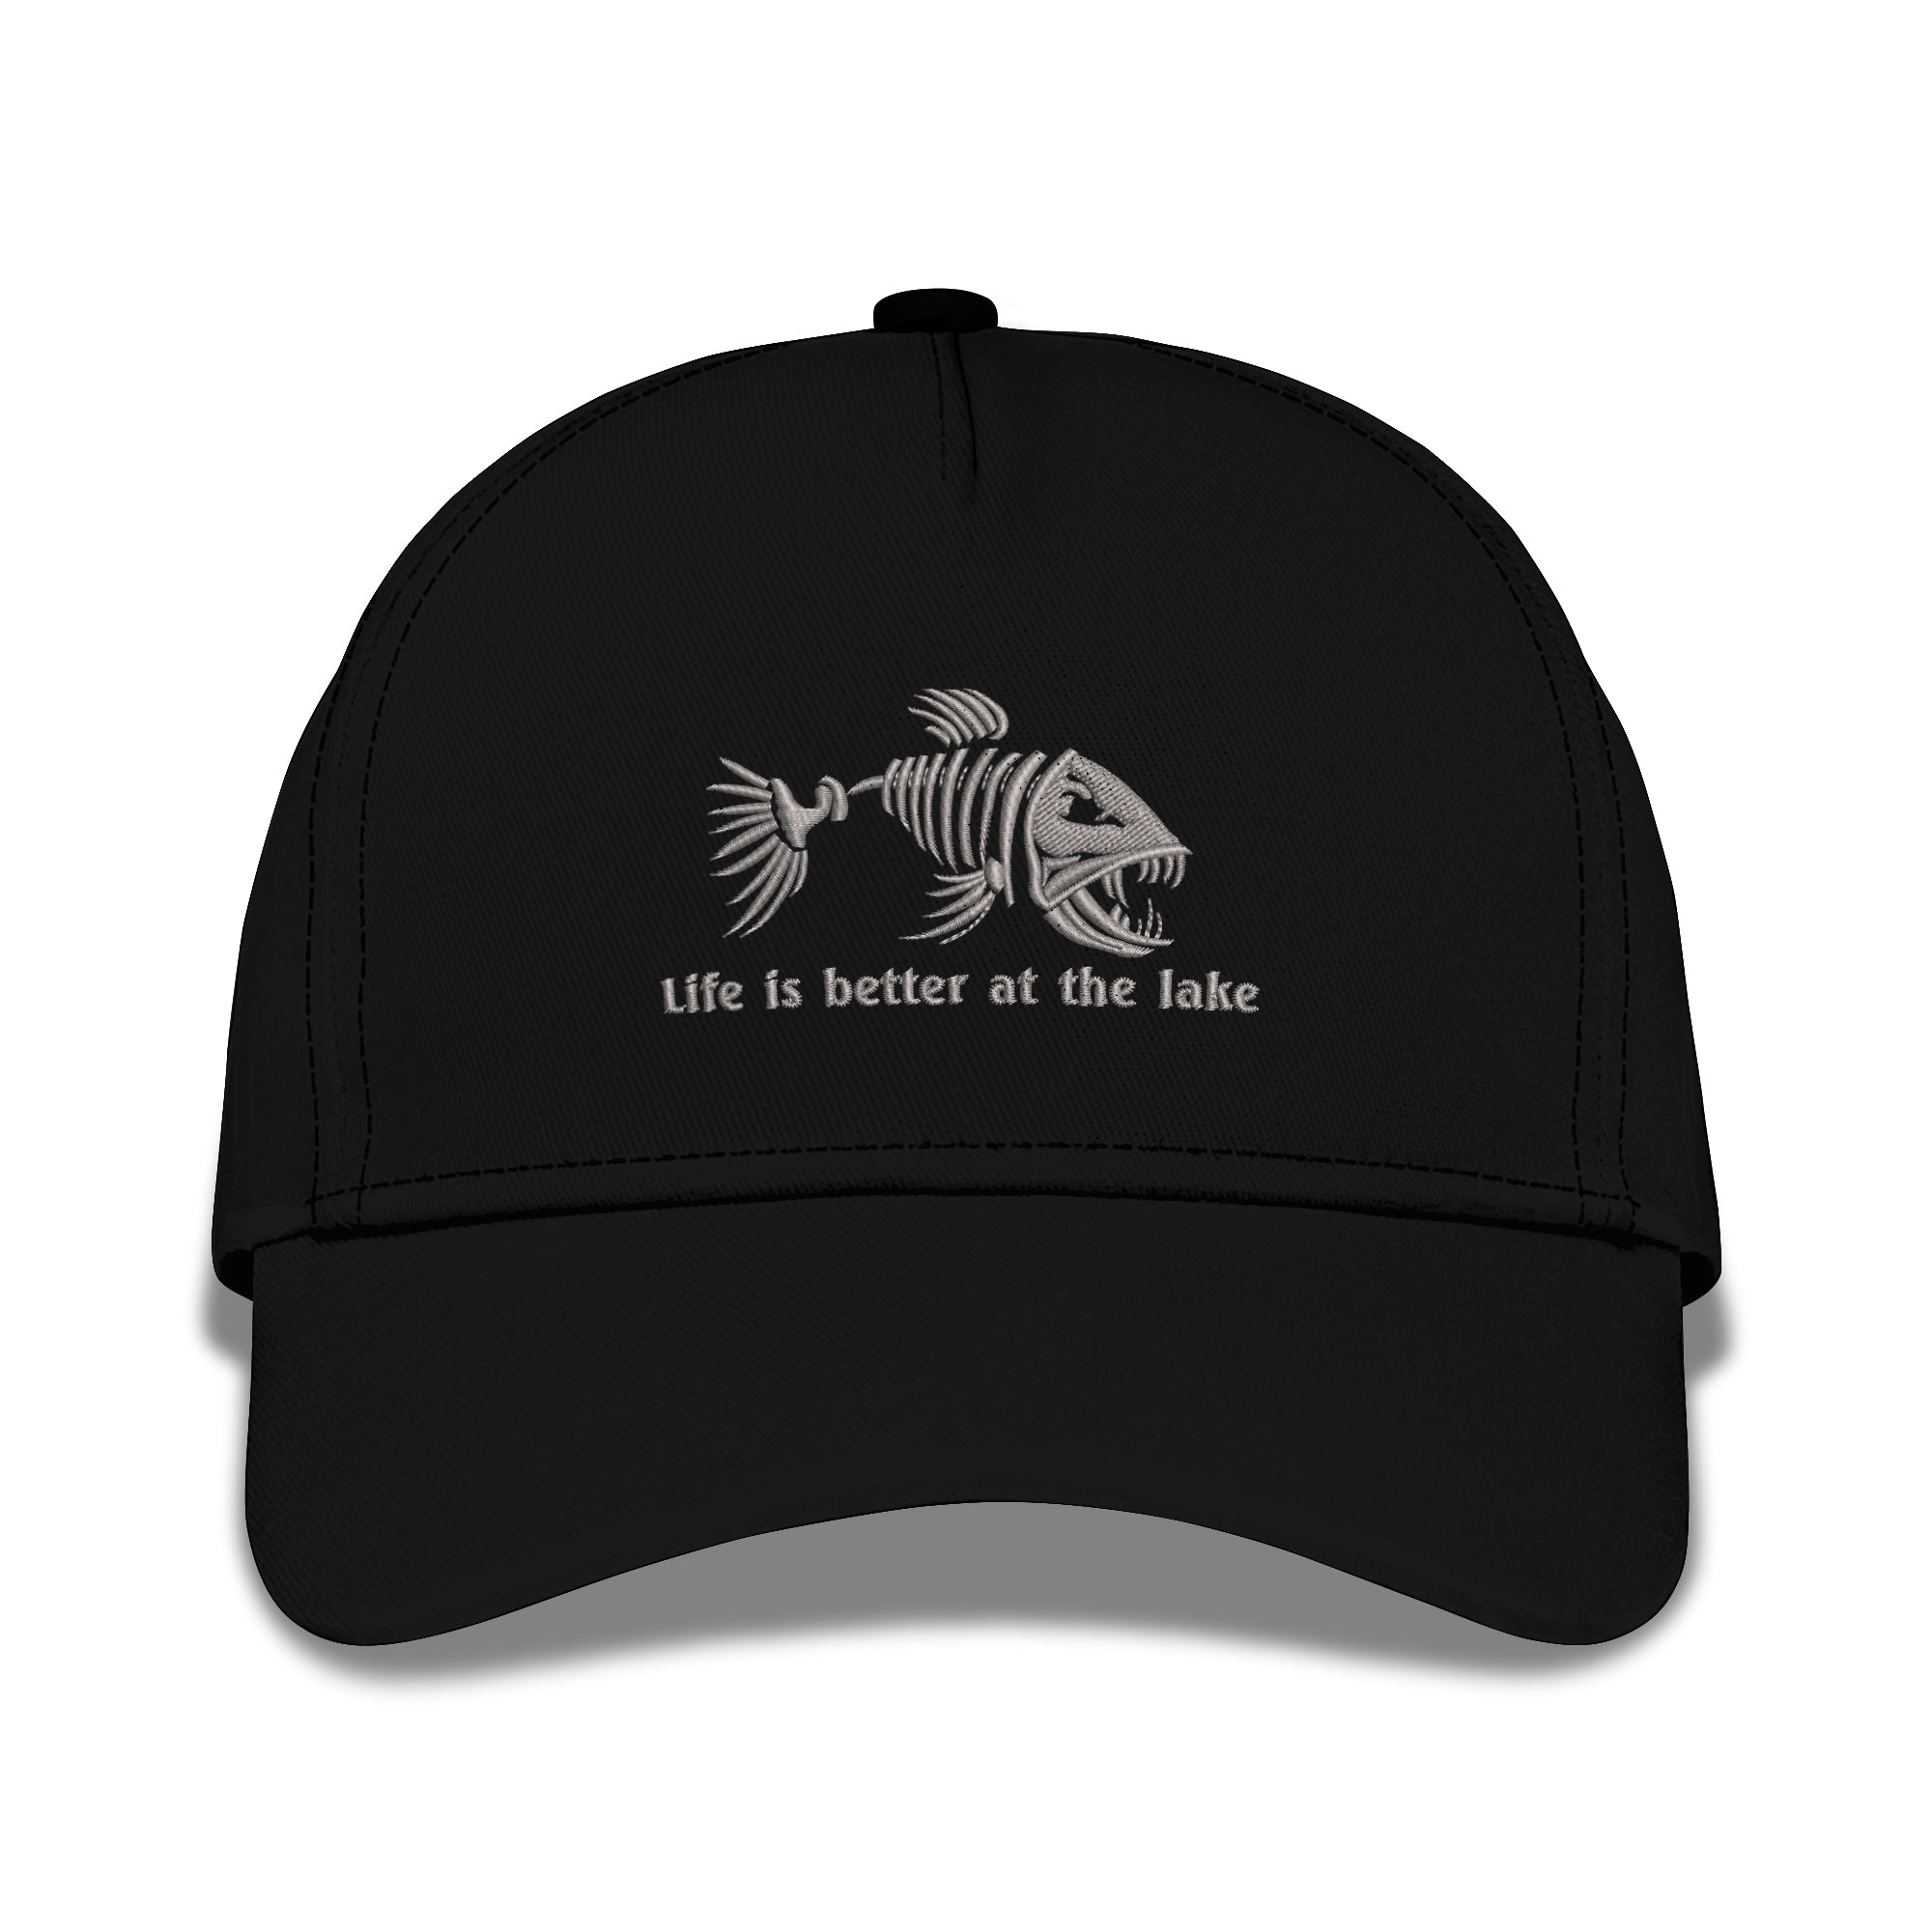 Life Is Better At The Lake Embroidered Baseball Caps